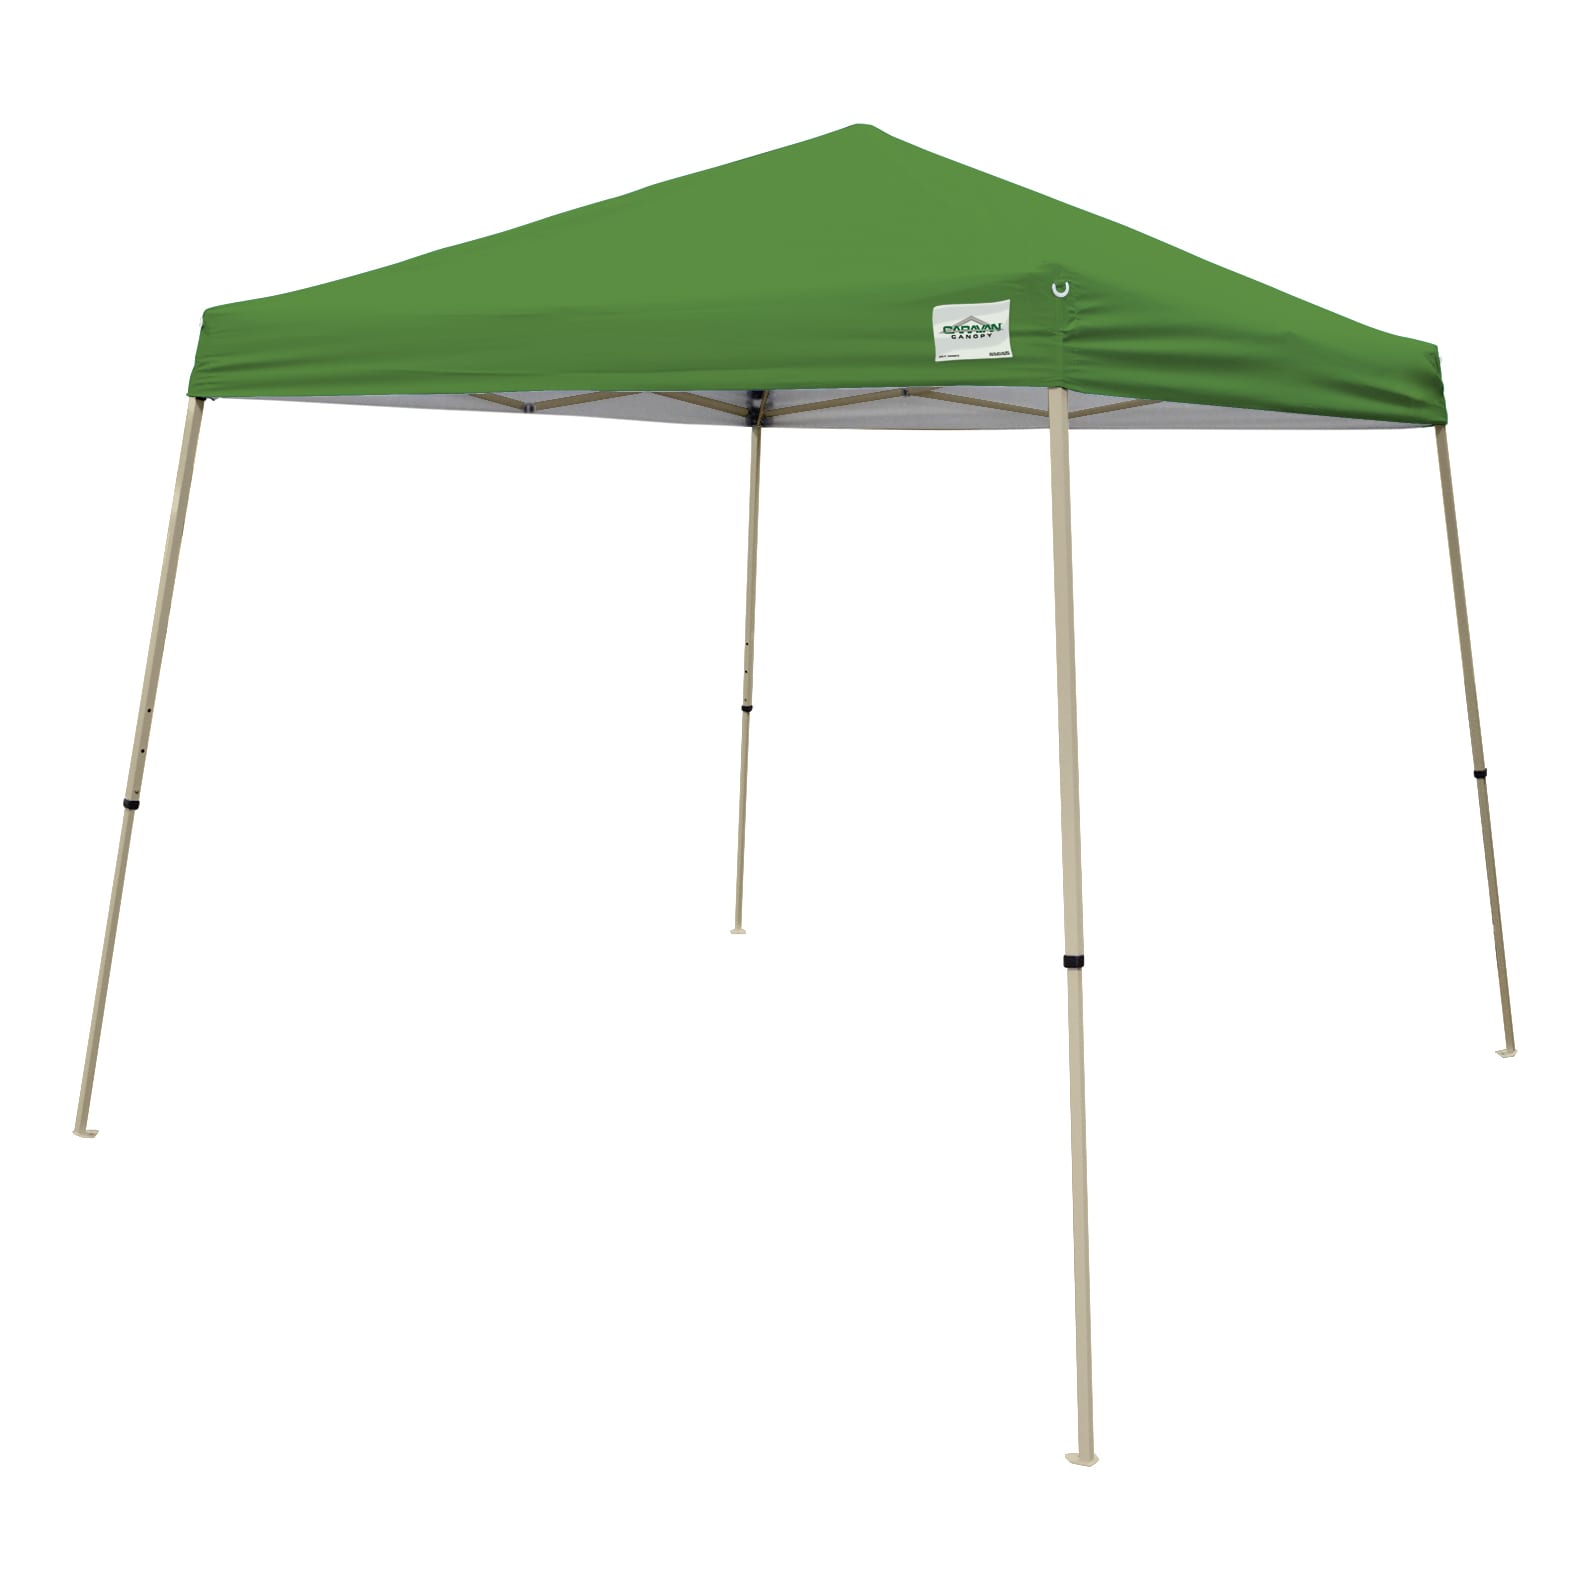 Caravan Canopy V Series 2 Green Canopy - Side View